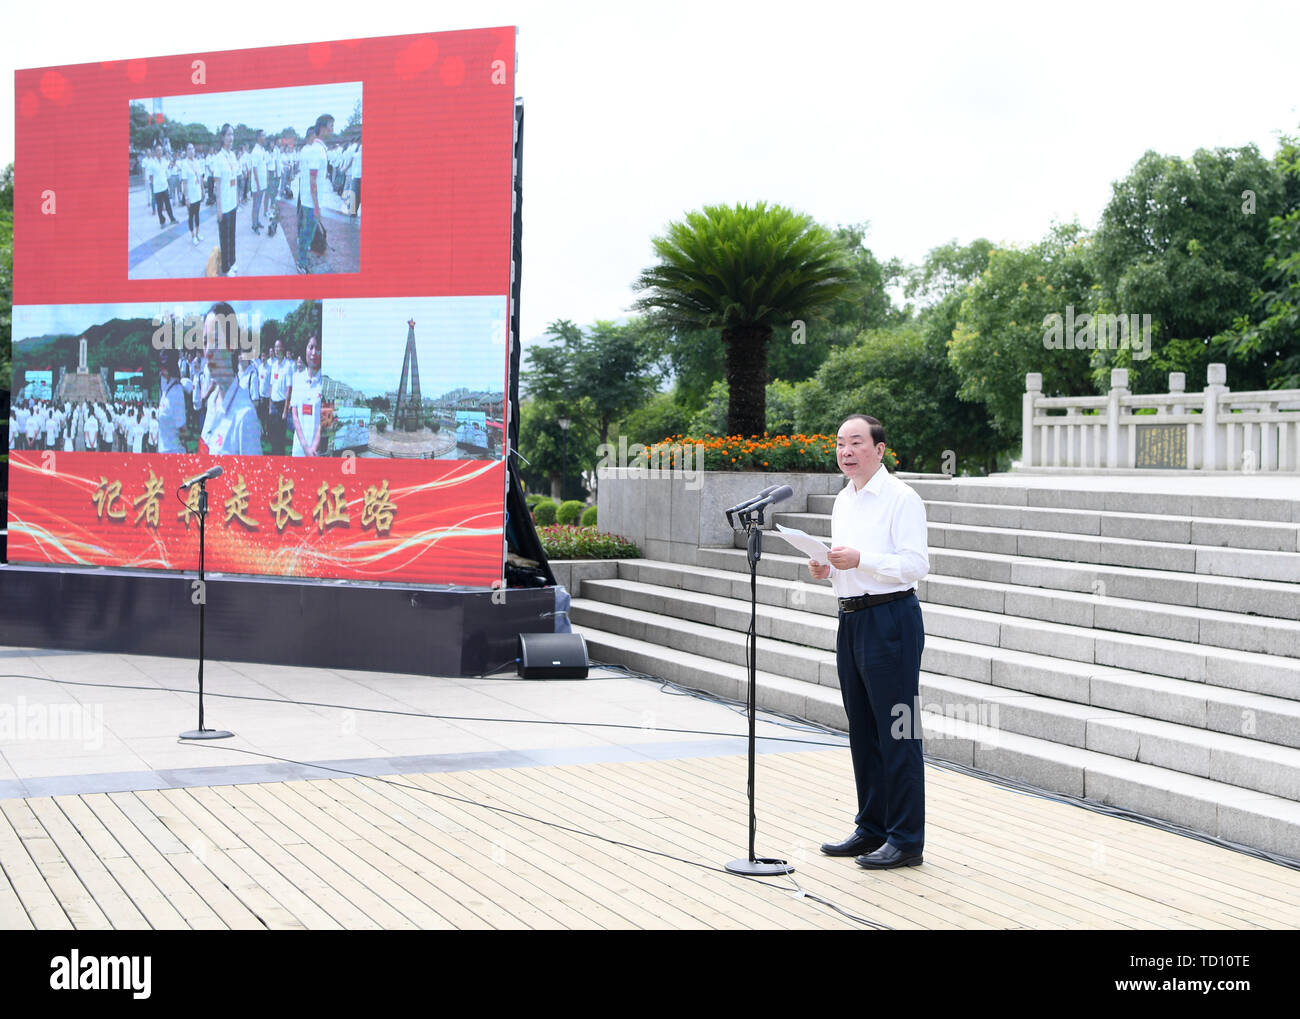 (190611) -- NANCHANG, June 11, 2019 (Xinhua) -- Huang Kunming, a member of the Political Bureau of the Communist Party of China (CPC) Central Committee and head of the Publicity Department of the CPC Central Committee, attends the launching ceremony of an activity that will take journalists to retrace the route of the Long March in Yudu County of Ganzhou City, east China's Jiangxi Province, June 11, 2019. The Long March was a military maneuver carried out by the Chinese Workers' and Peasants' Red Army from 1934 to 1936. During this period, they left their bases and marched through rivers, moun Stock Photo